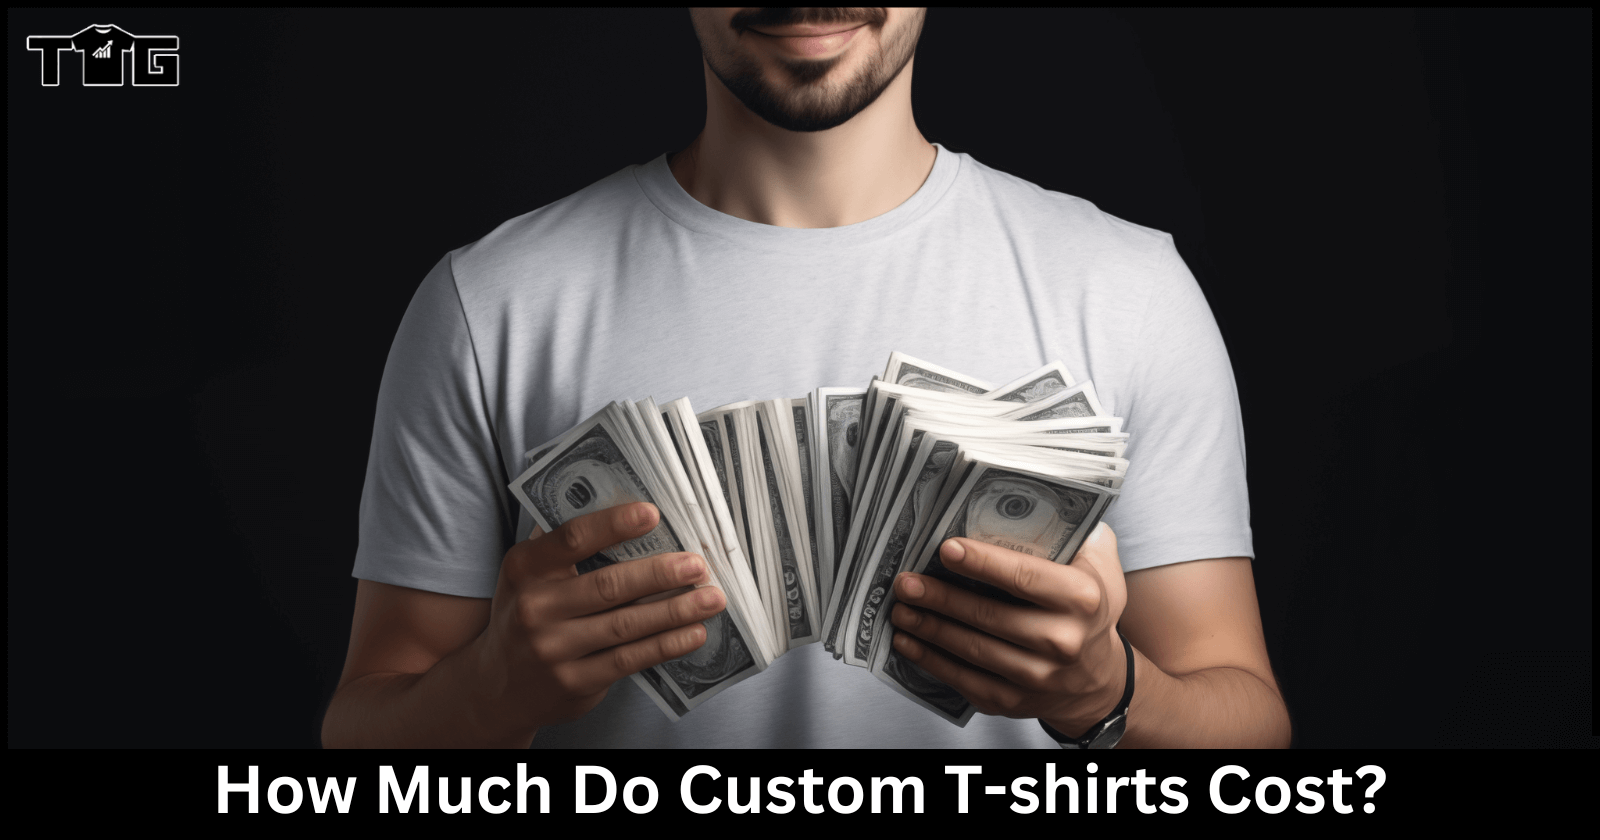 How Much Do Custom T-shirts Cost?